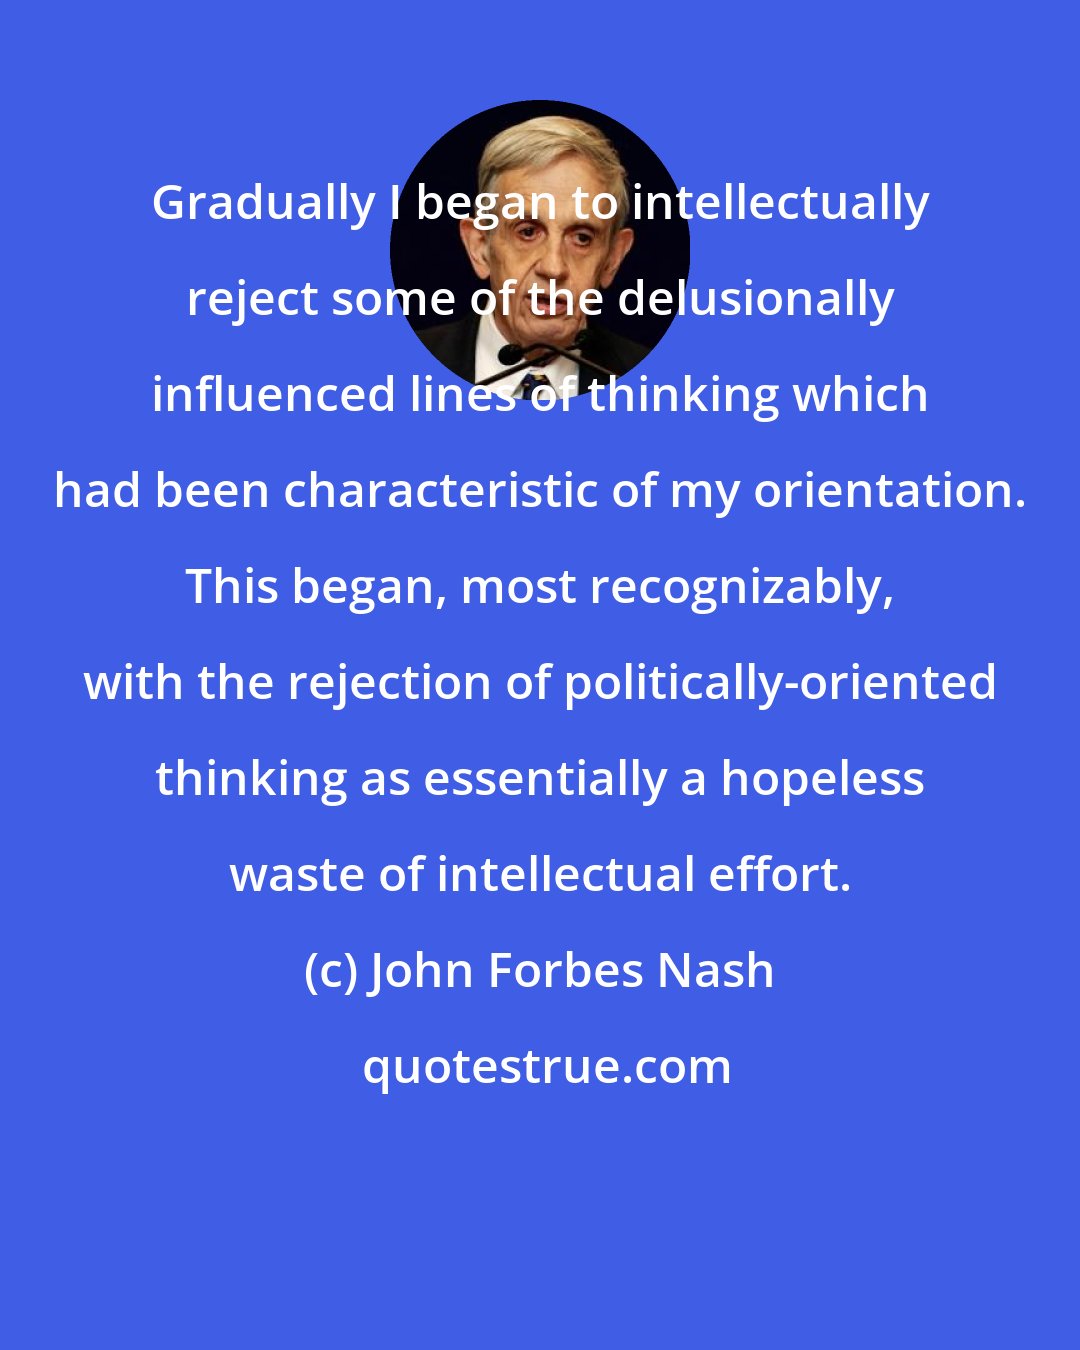 John Forbes Nash: Gradually I began to intellectually reject some of the delusionally influenced lines of thinking which had been characteristic of my orientation. This began, most recognizably, with the rejection of politically-oriented thinking as essentially a hopeless waste of intellectual effort.